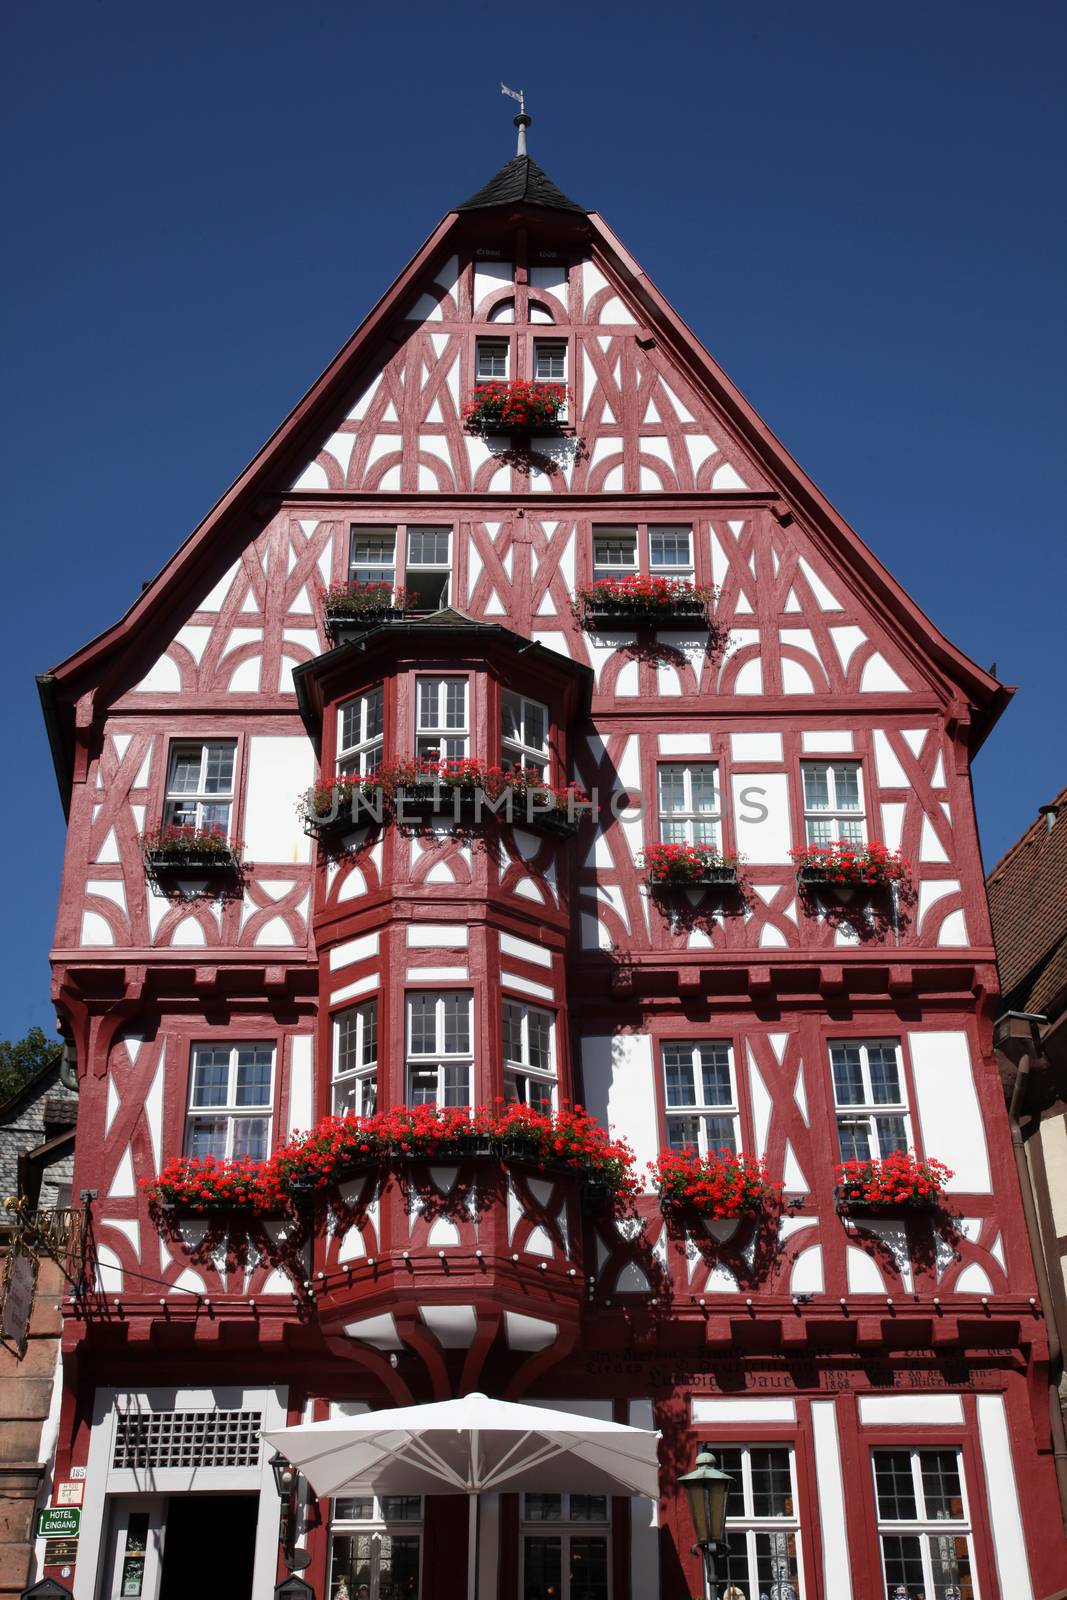 Half-timbered old houses in Miltenberg, Germany by atlas